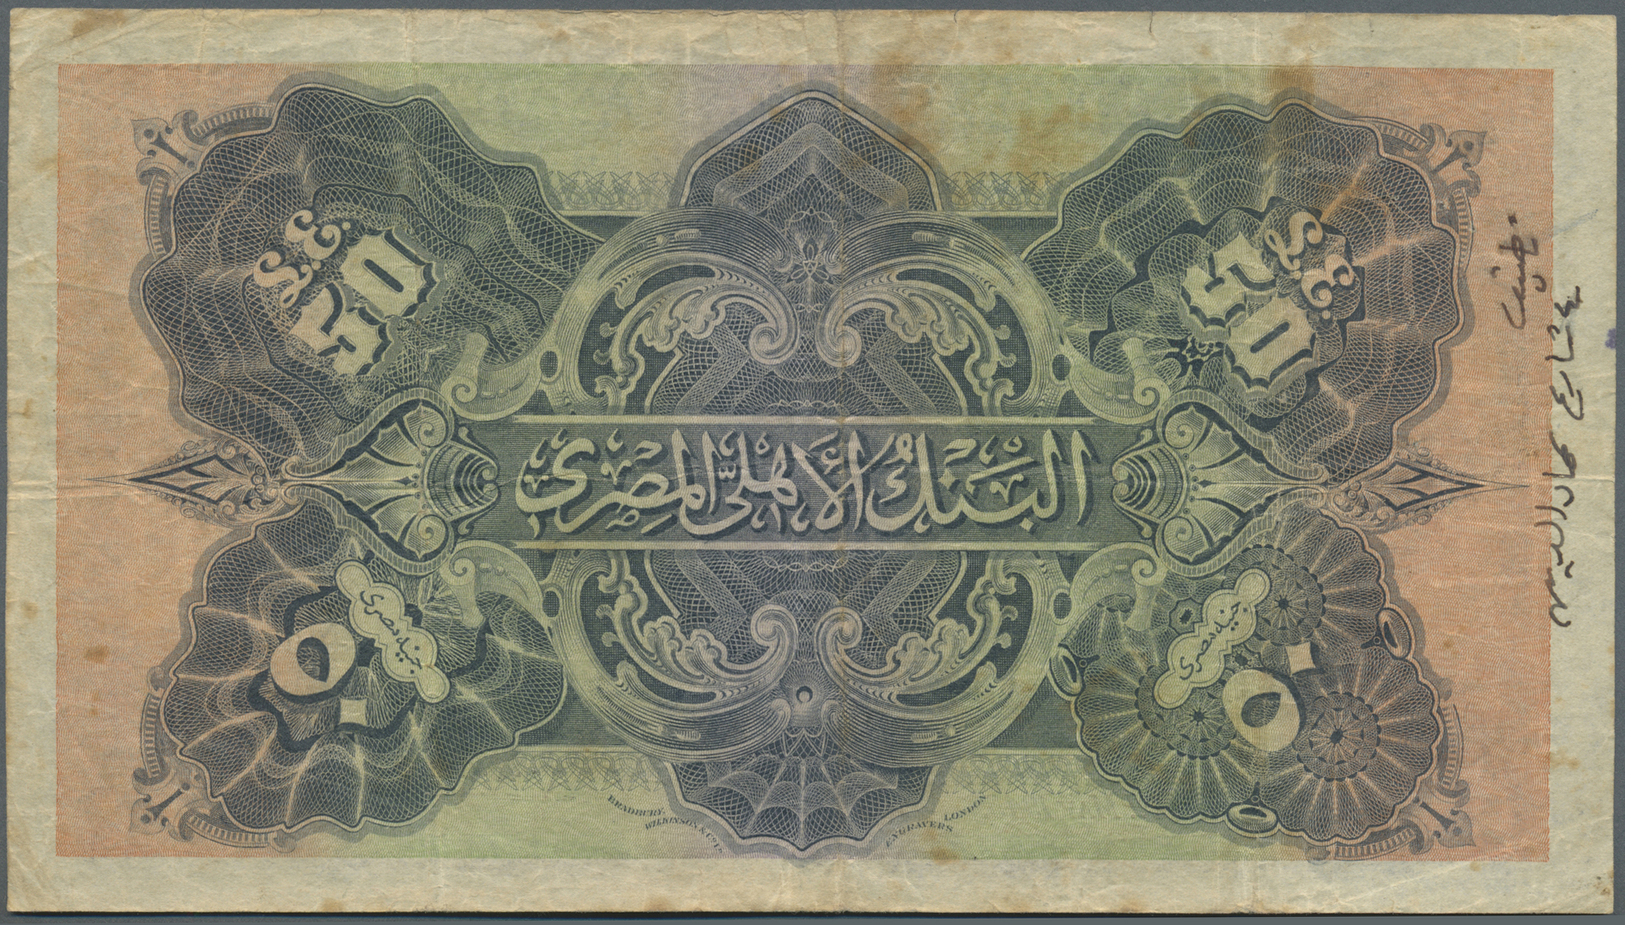 00688 Egypt / Ägypten: Egypt: 50 Pounds 1945 P. 15d, Used With Stained But Still Strong Paper, Horizontal And Vertical F - Egypt